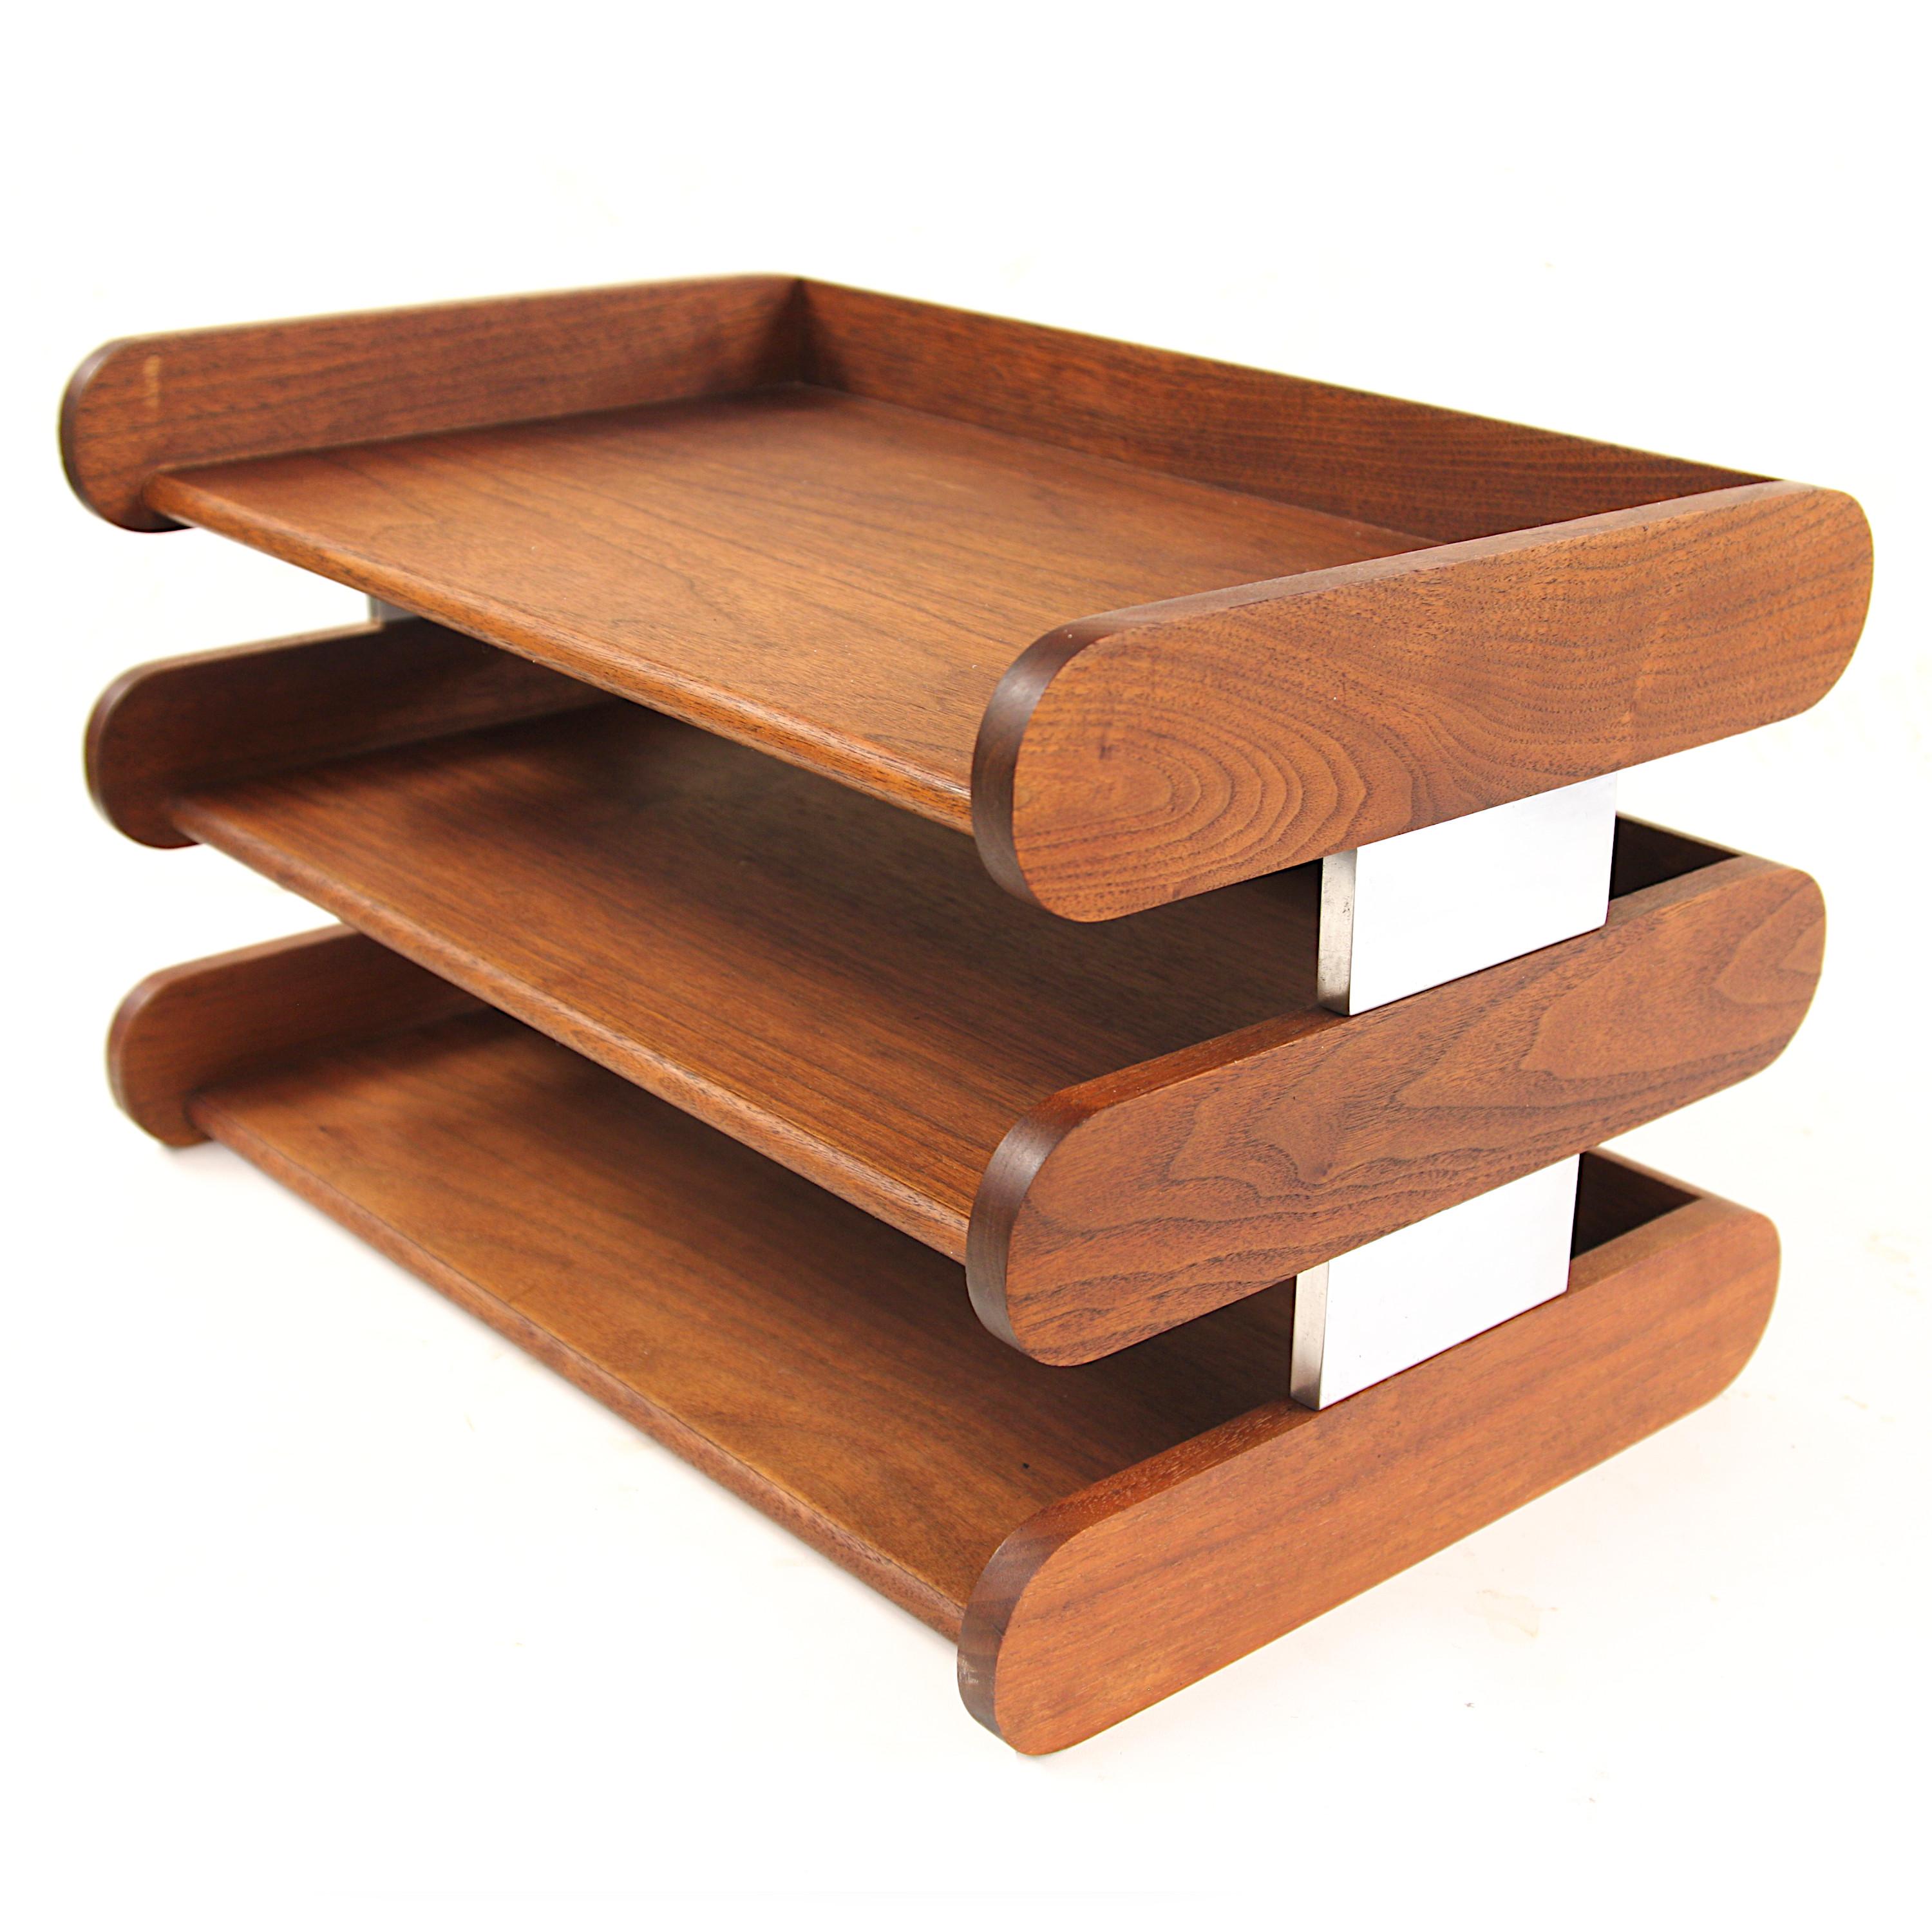 Wonderful Mid-Century Modern paper/letter tray by Peter Pepper Products of Compton, CA. Tray features solid walnut & polished aluminum construction with a wonderful 3-tiered design. The perfect desk accessory to accentuate any Mid-Century Modern